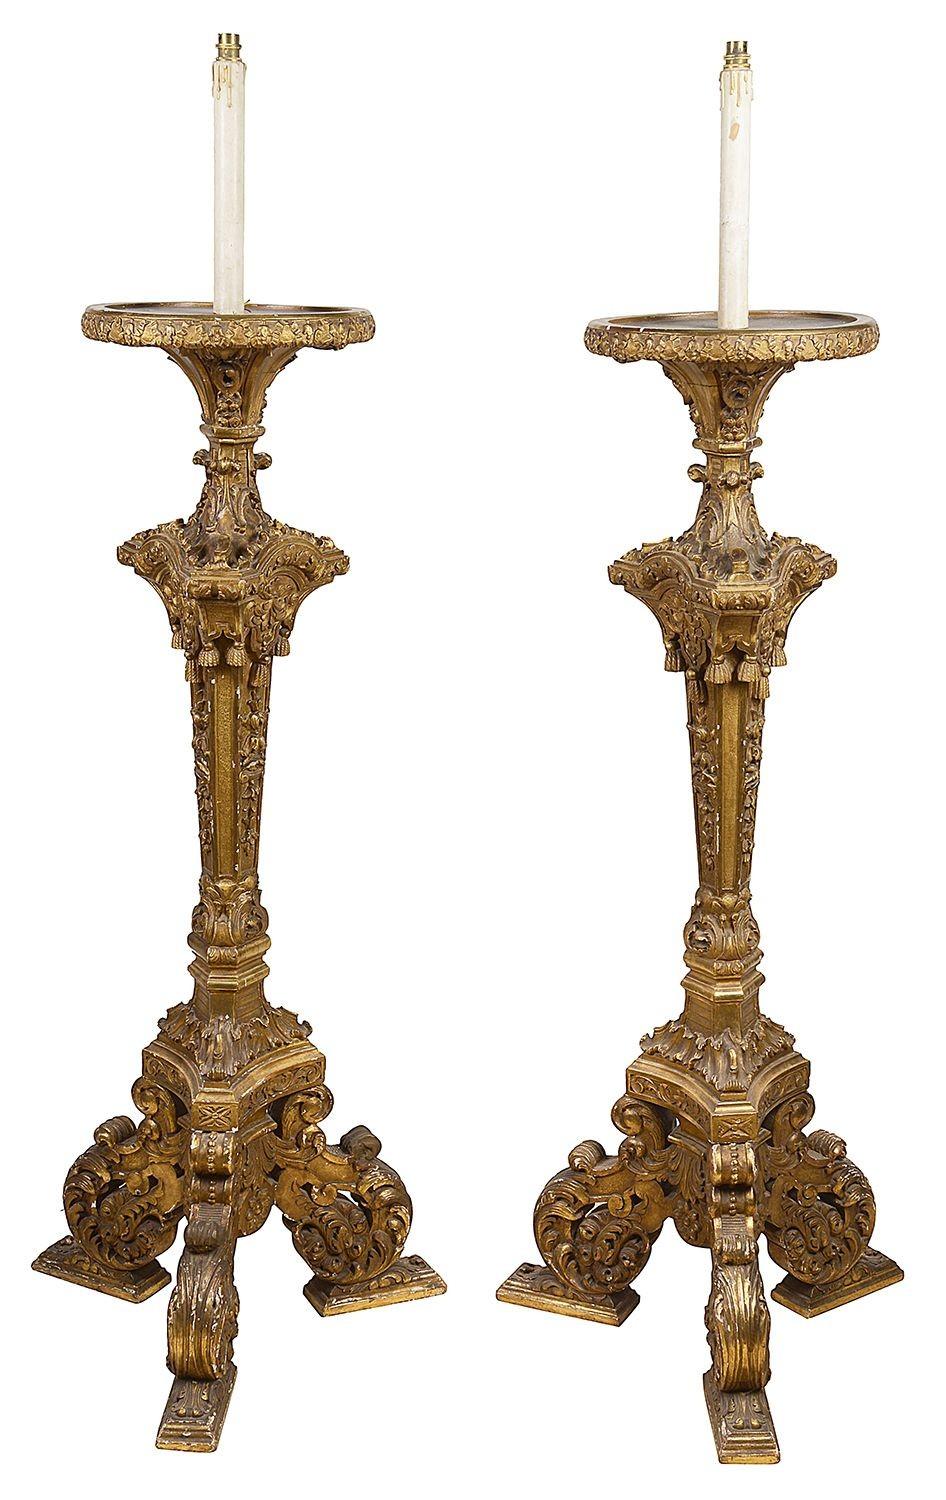 A good quality pair of 18th Century style Italian giltwood torchers / lamps.
Each with wonderful carved scrolling foliate decoration, tassels and triform bases. Circa 1880

Batch 68 DCYEK 57215